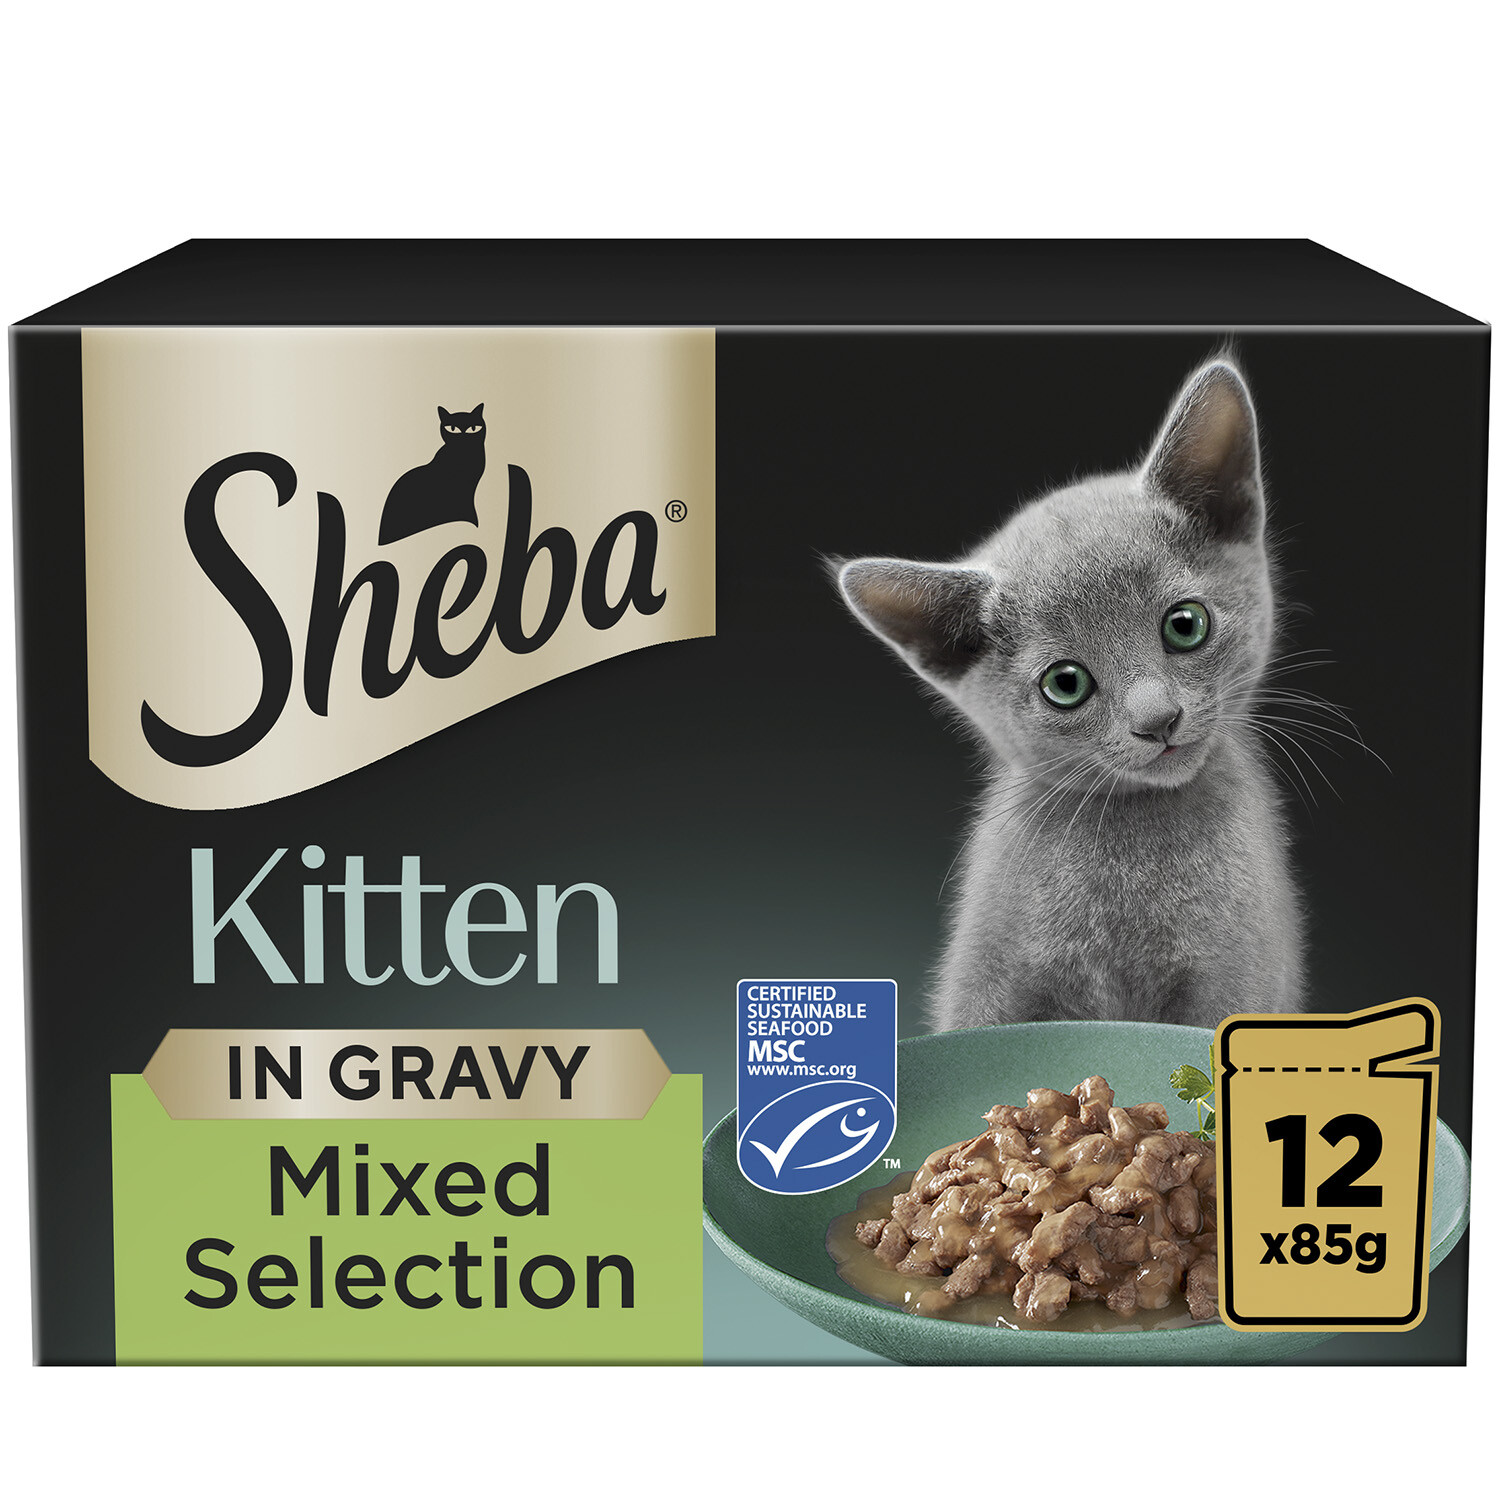 Sheba Mixed Selection Kitten Food Pouches in Gravy - 12 Image 3